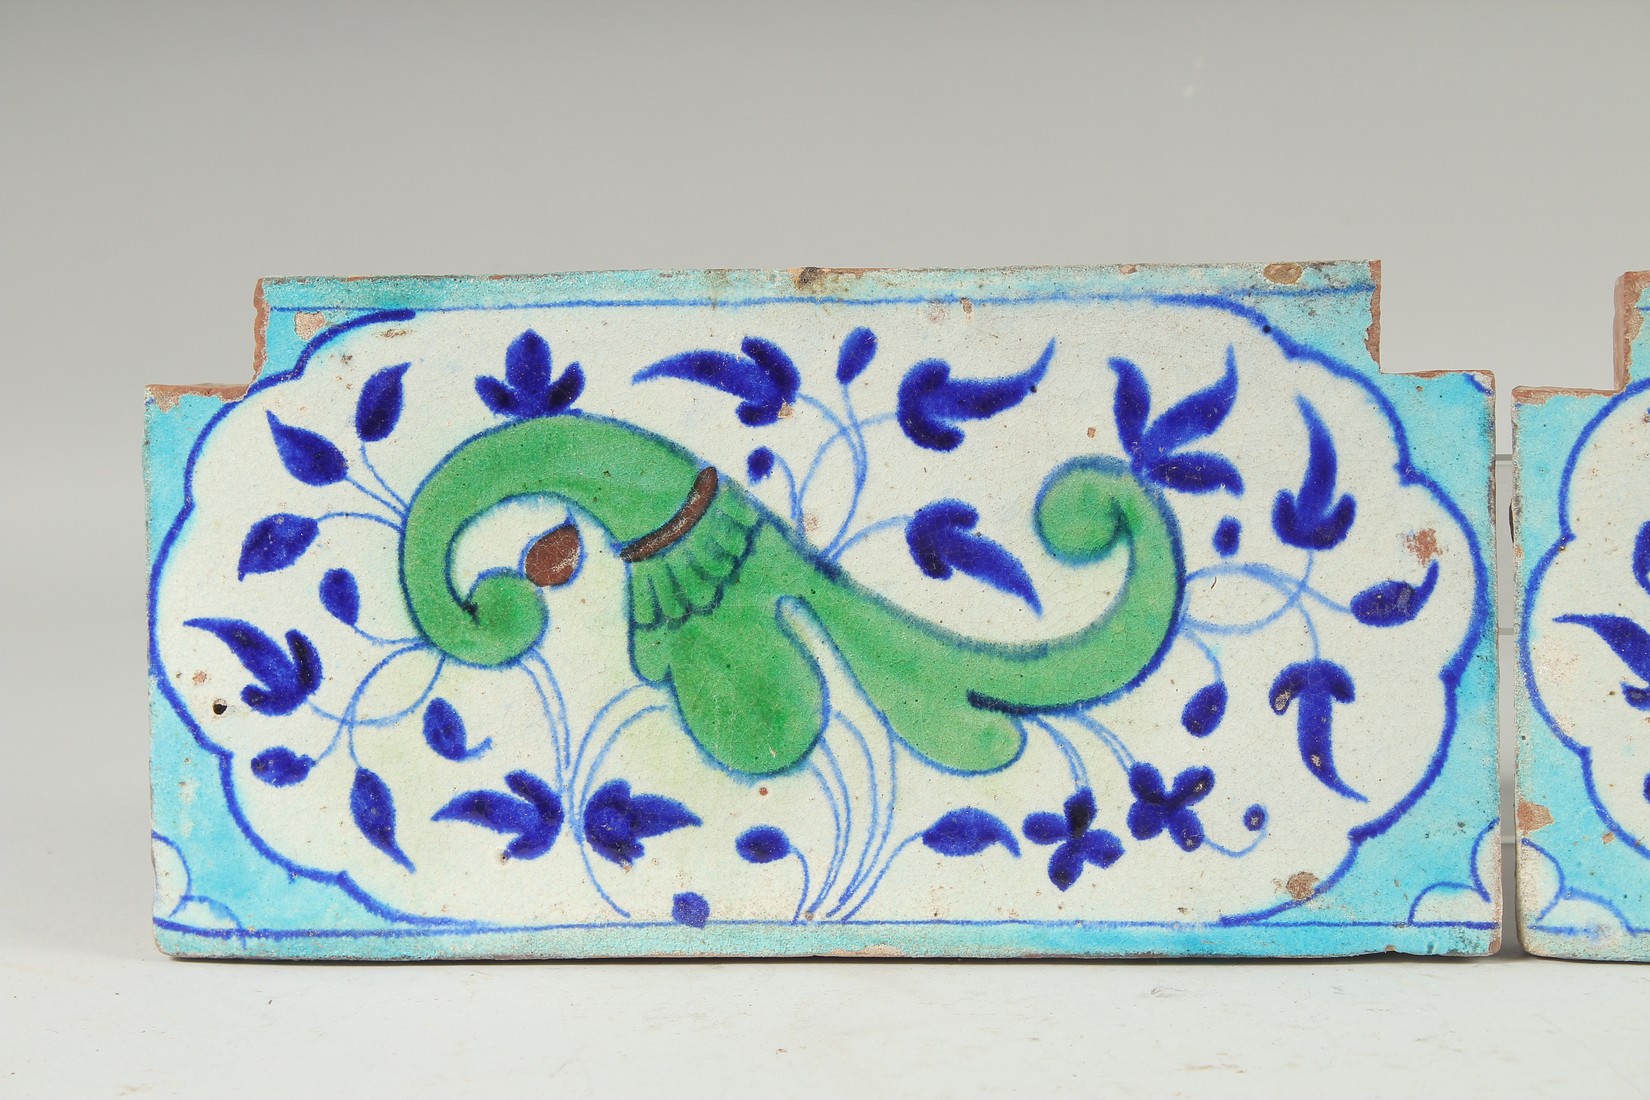 A PAIR OF 18TH-19TH CENTURY MUGHAL NORTH INDIAN MULTAN POTTERY TILES, each 30cm x 15cm. - Image 2 of 4